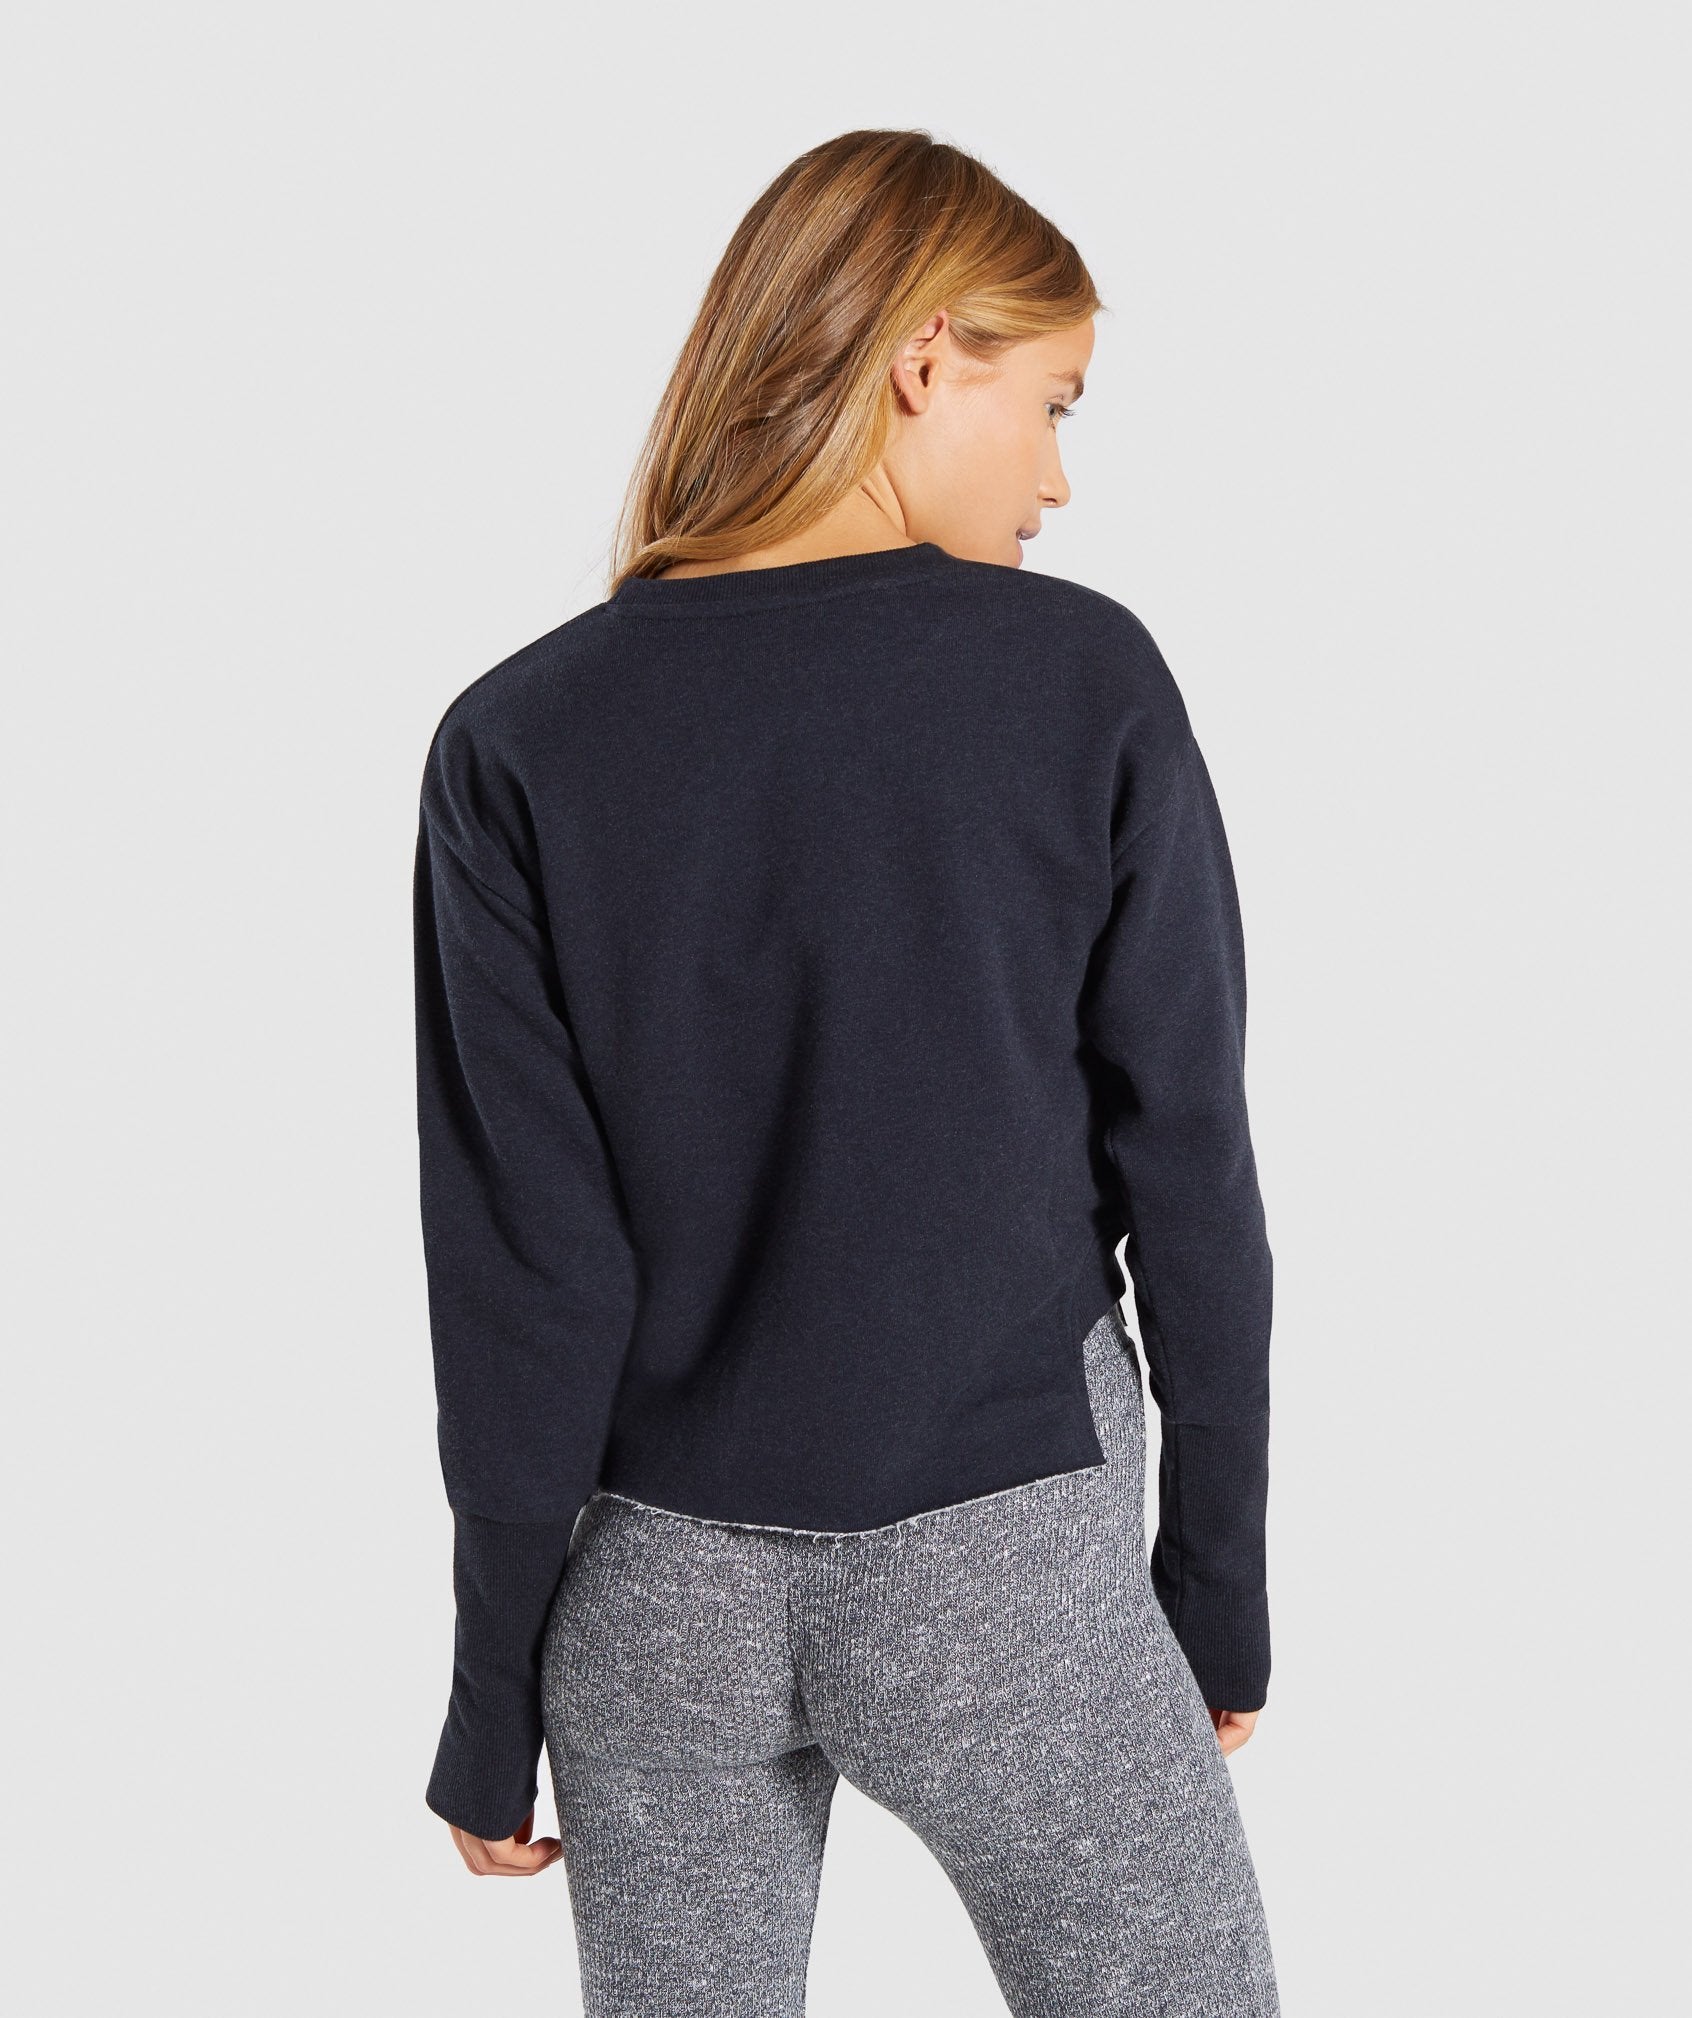 Slounge Crescent Sweater in Black Marl - view 3